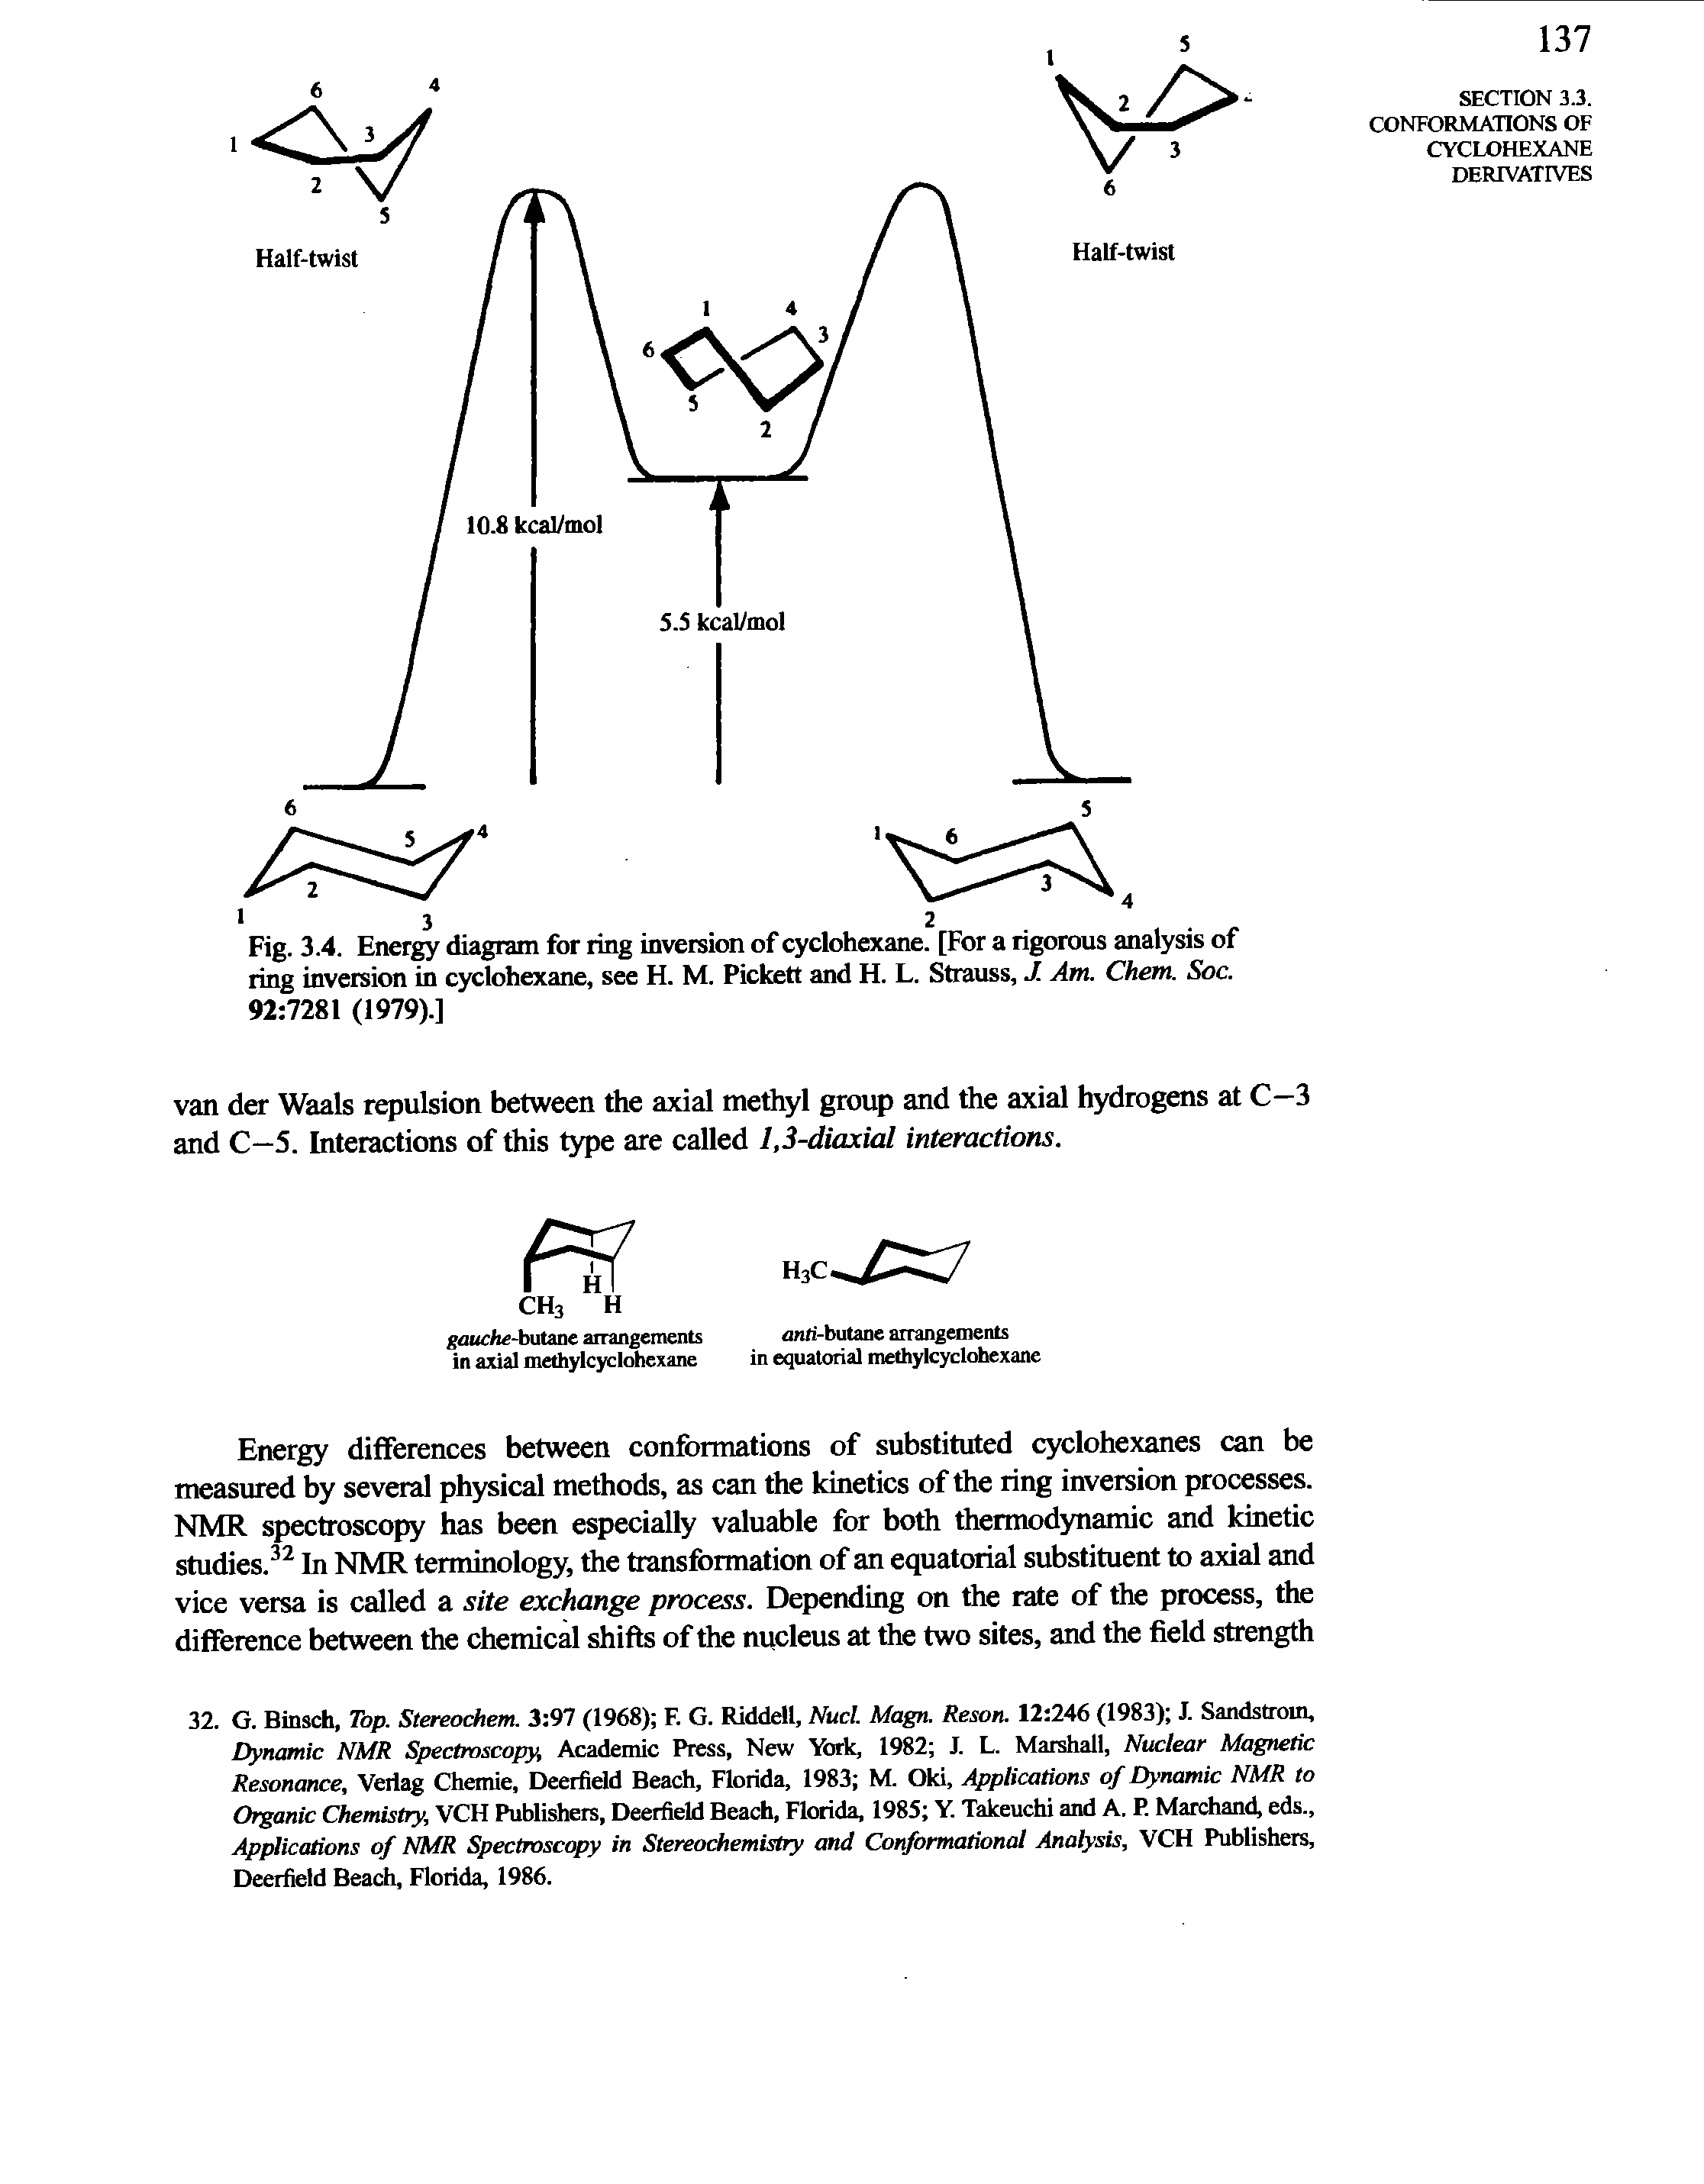 Fig. 3.4. Energy diagram for ring inversion of cyclohexane. [For a rigorous analysis of ring inversion in cyclohexane, see H. M. Pickett and H. L. Strauss, J Am. Chem. Soc. 92 7281 (1979).]...